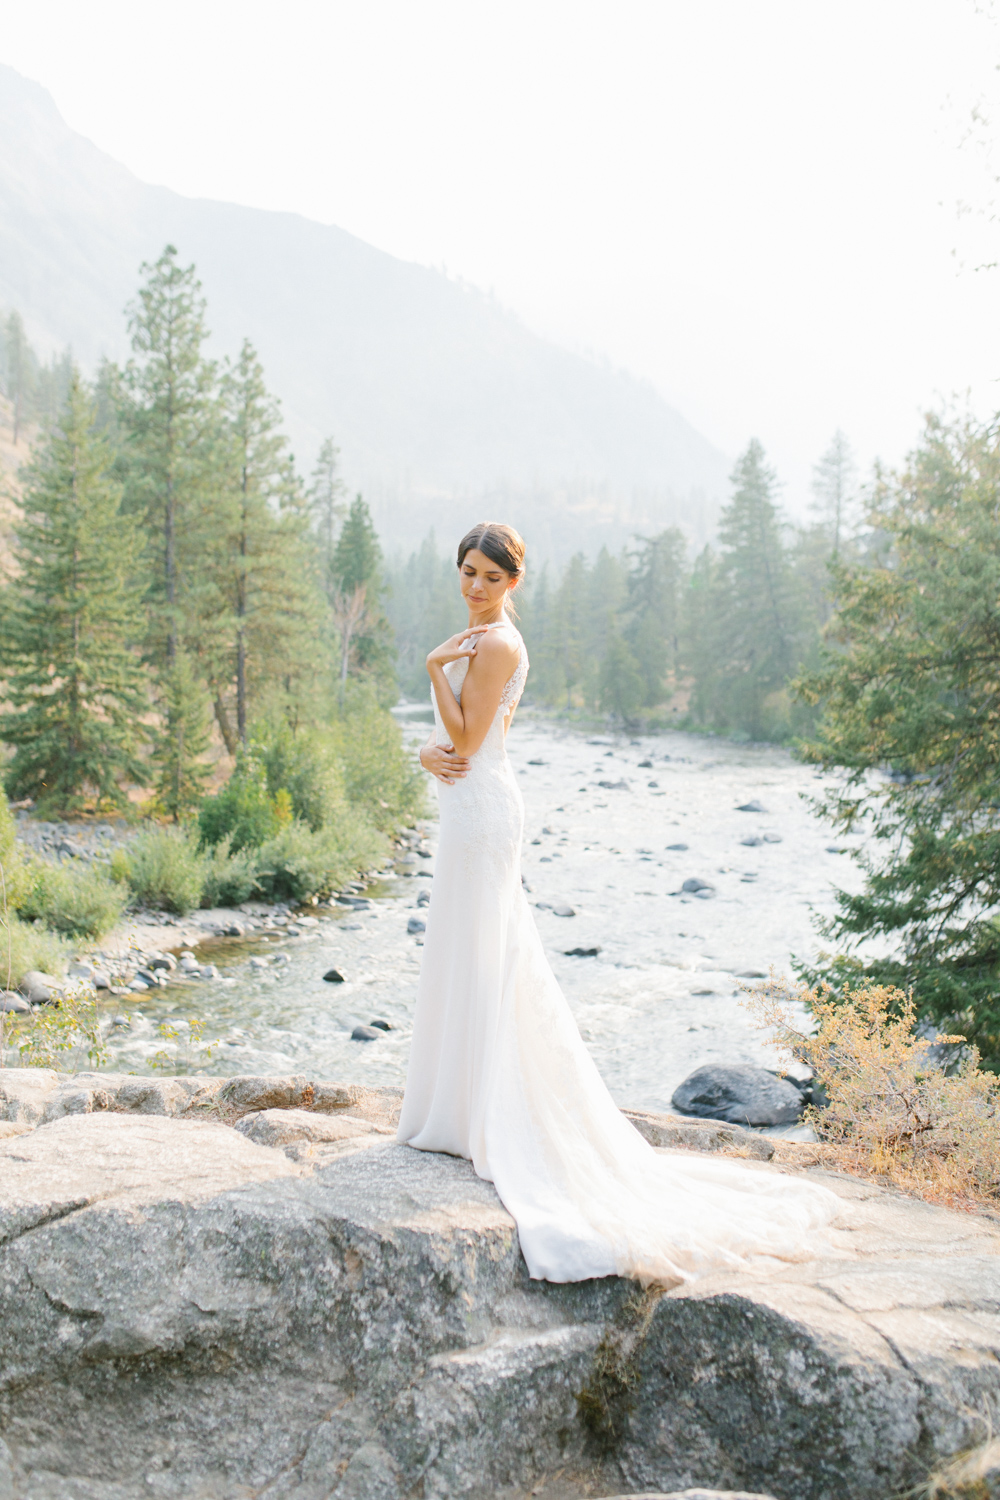 Grey and White Wedding in the Mountains of Leavenworth, Washington | Sleeping Lady | Classic and Timeless Wedding | VSCO | Stunning Mountain Top Bride and Groom Portraits on the Icicle River.jpg-3284.jpg